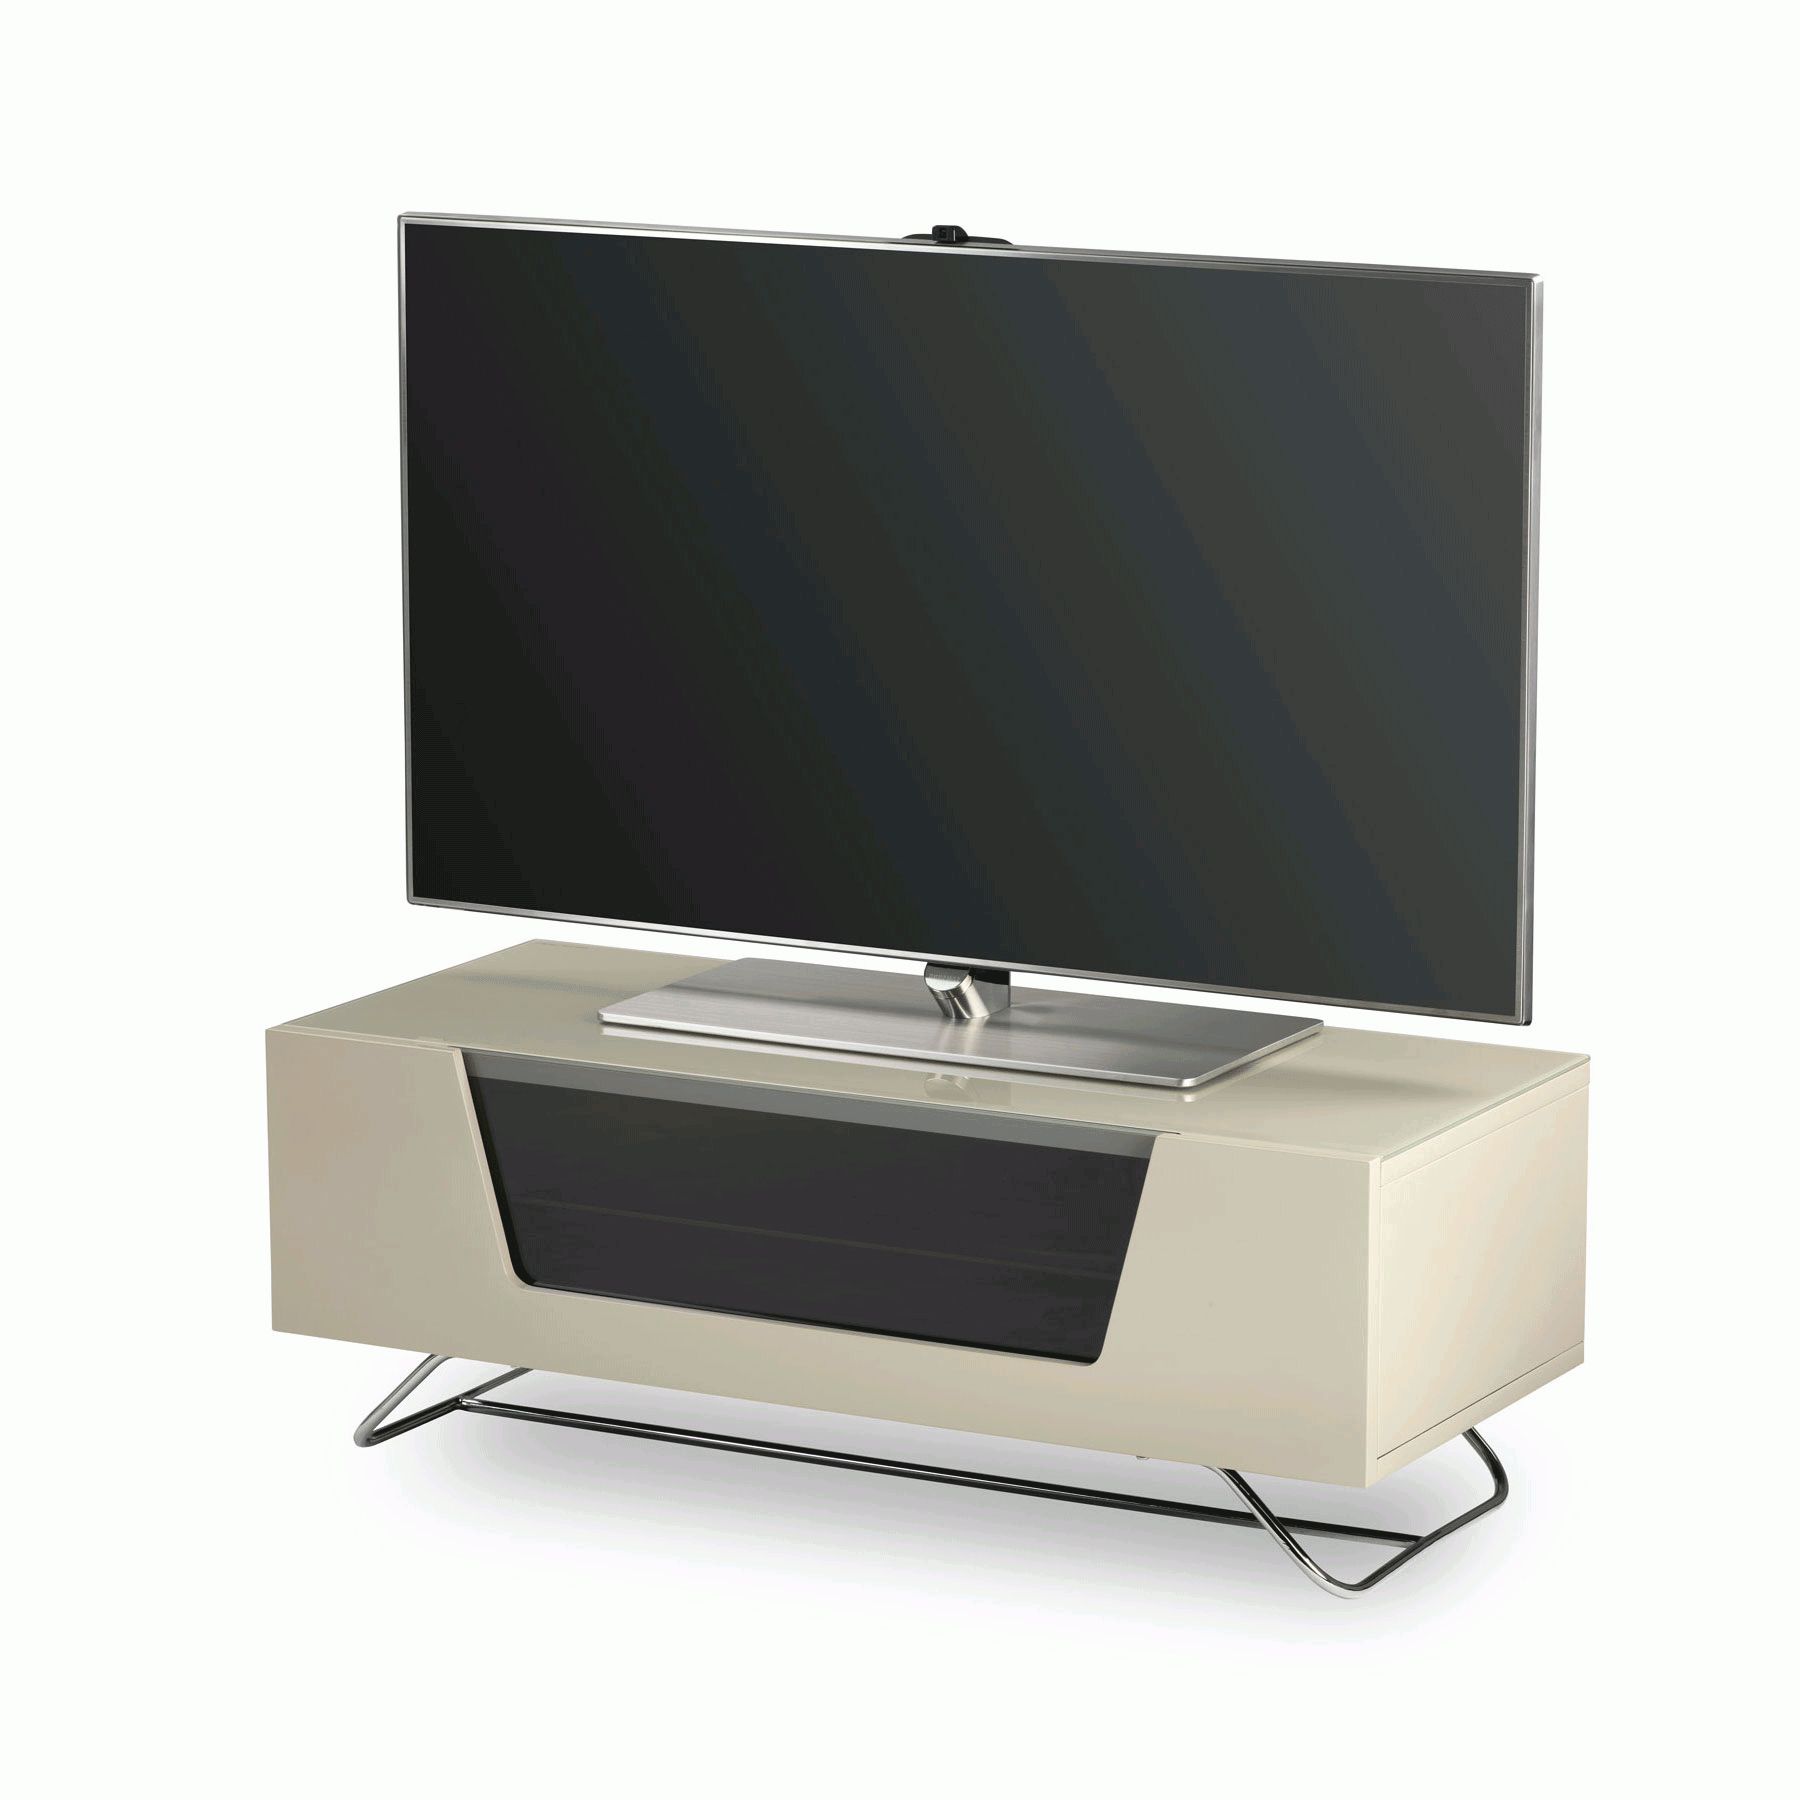 Well Known Alphason Chromium 2 100cm Ivory Tv Stand For Up To 50" Tvs For 100cm Tv Stands (View 5 of 20)